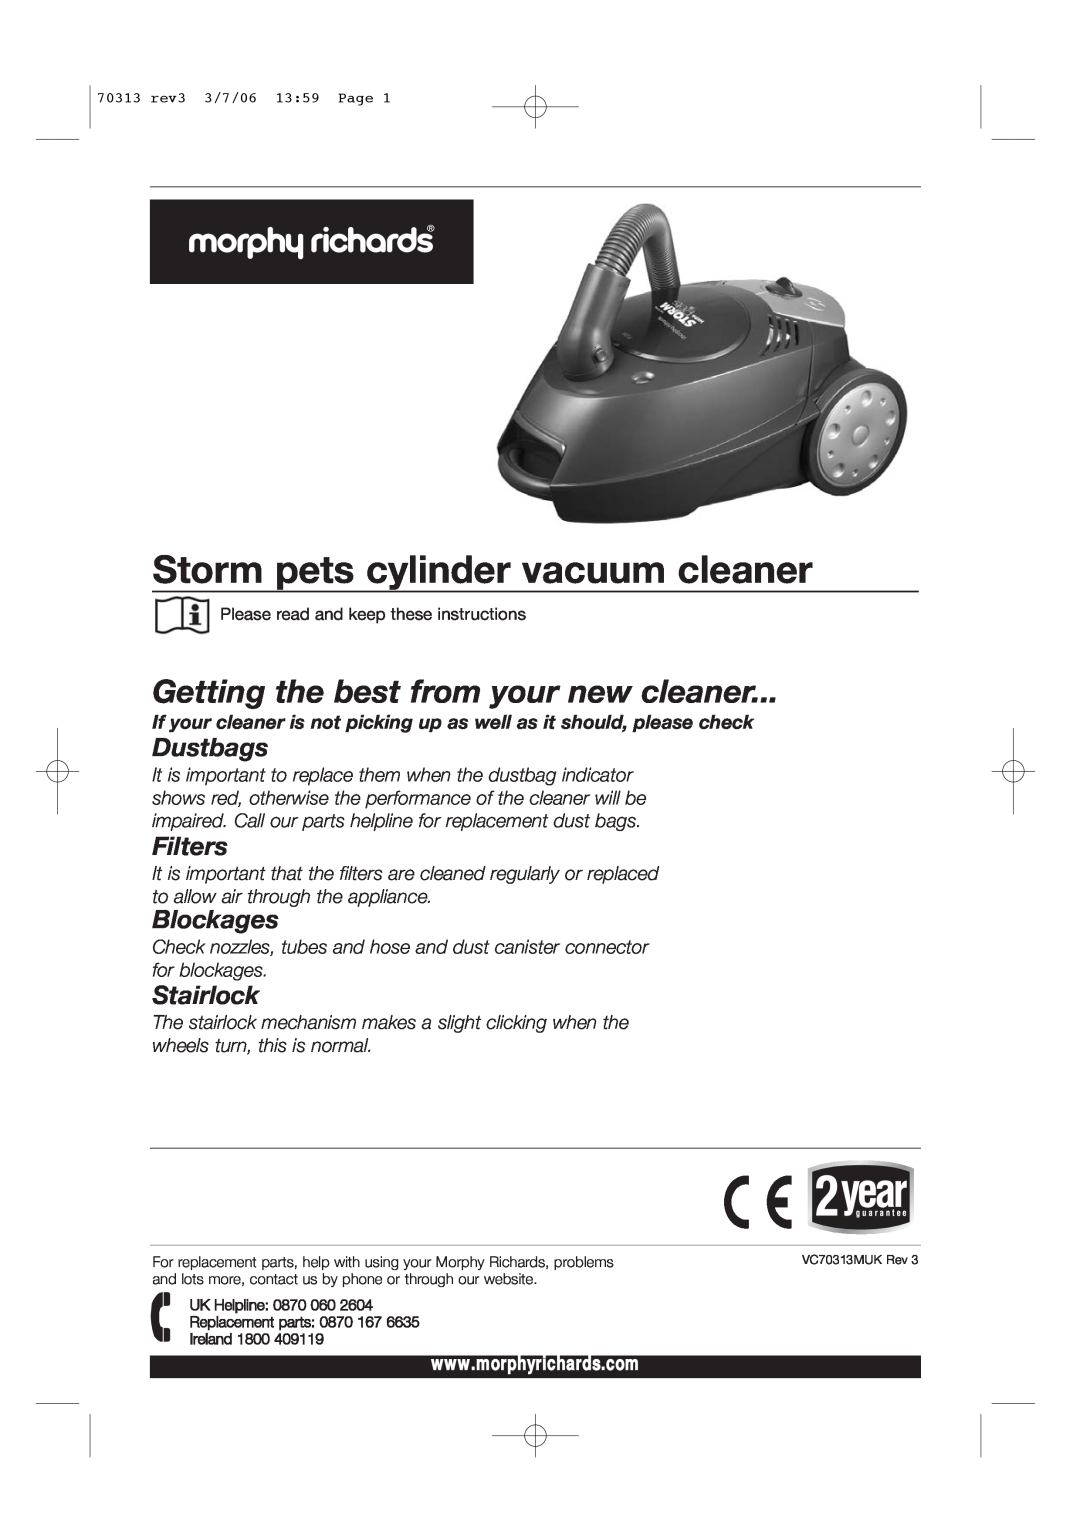 Morphy Richards Storm pets cylinder vacuum cleaner manual Getting the best from your new cleaner, Dustbags, Filters 